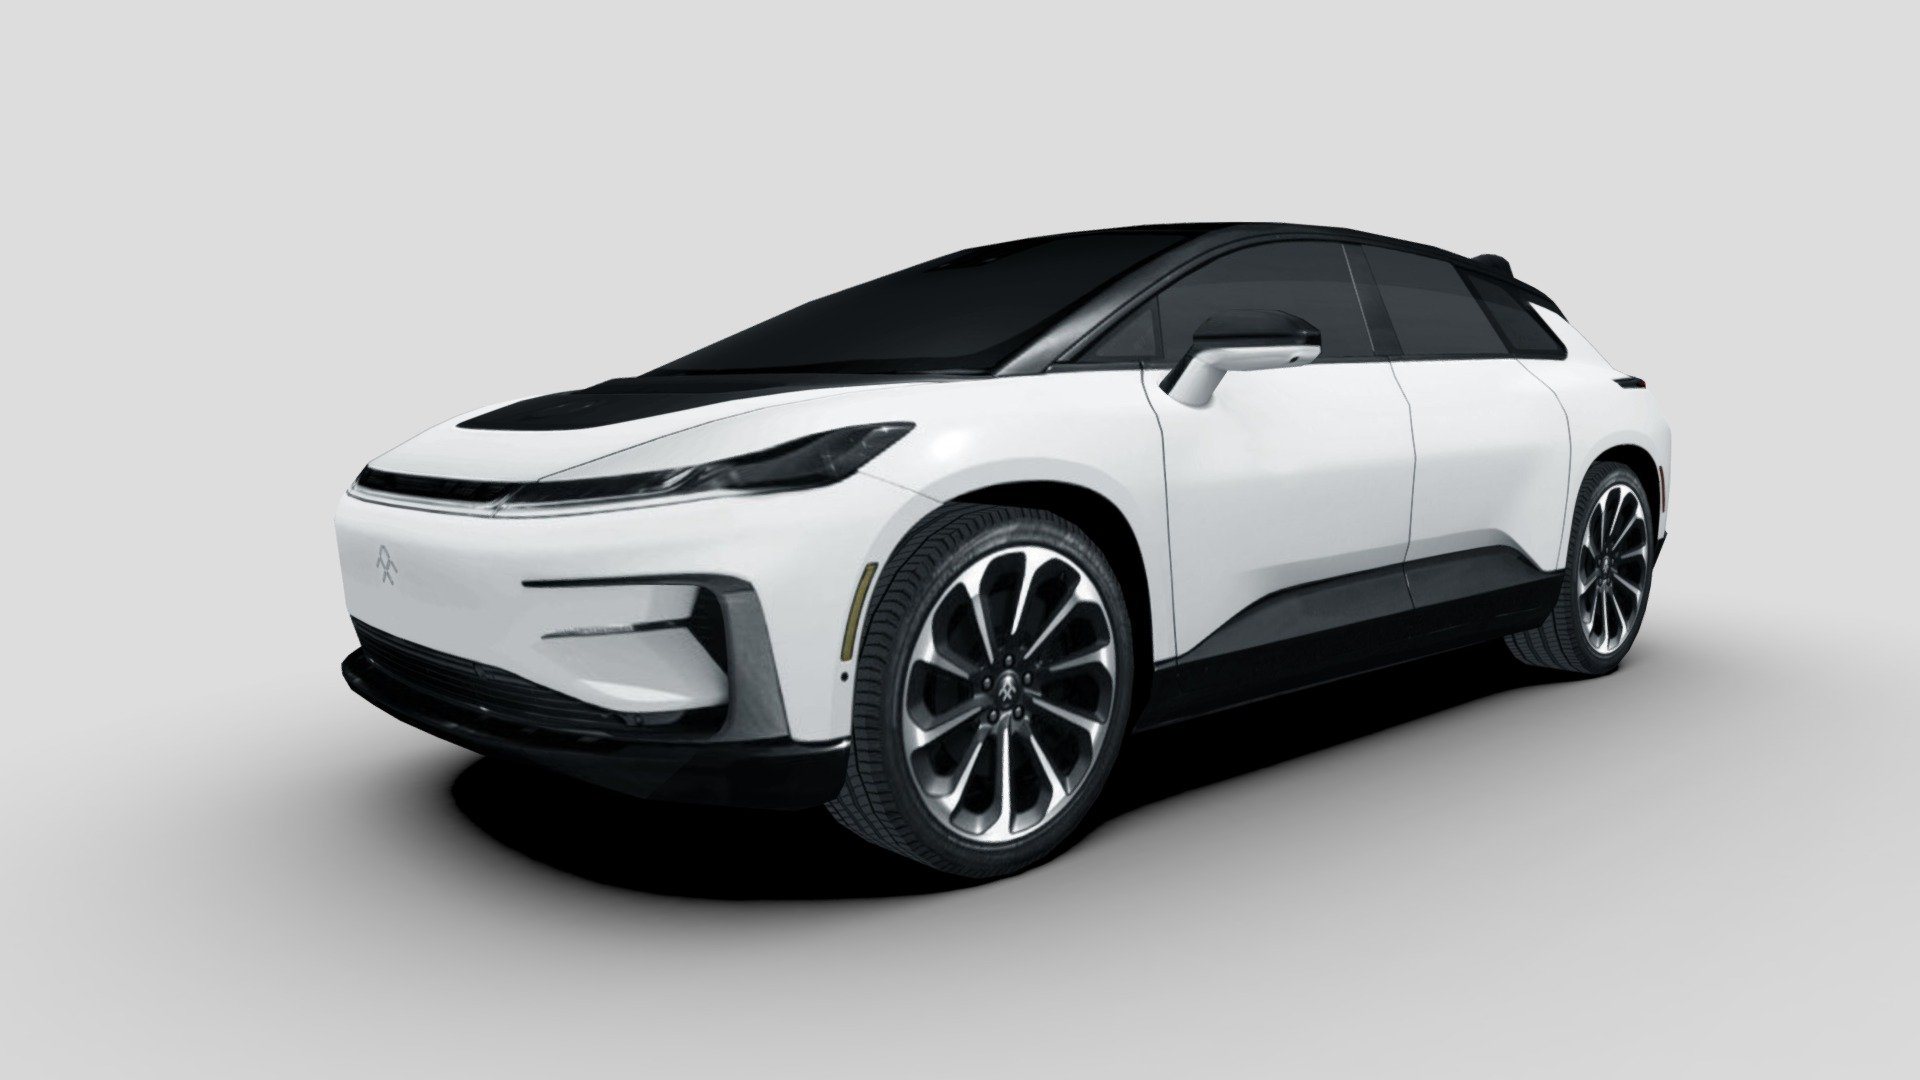 3d model of the 2024 Faraday Future FF91, a battery electric luxury crossover.

The model is very low-poly, full-scale, real photos texture (single 2048 x 2048 png).

Package includes 5 file formats and texture (3ds, fbx, dae, obj and skp)

Hope you enjoy it.

José Bronze - Faraday Future FF91 2024 - Buy Royalty Free 3D model by Jose Bronze (@pinceladas3d) 3d model